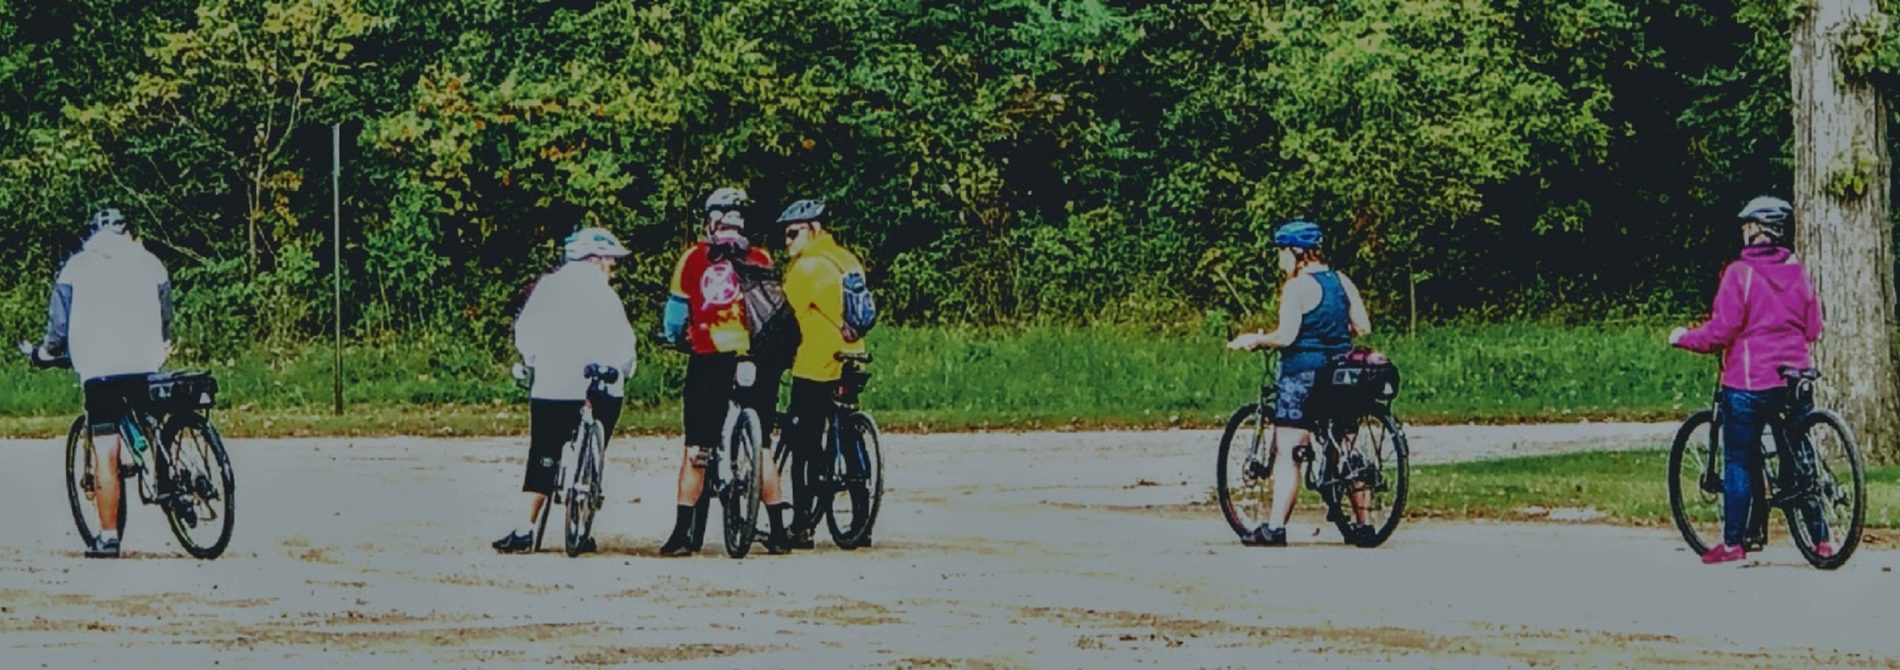 6 people on bicycles approaching a forest of trees